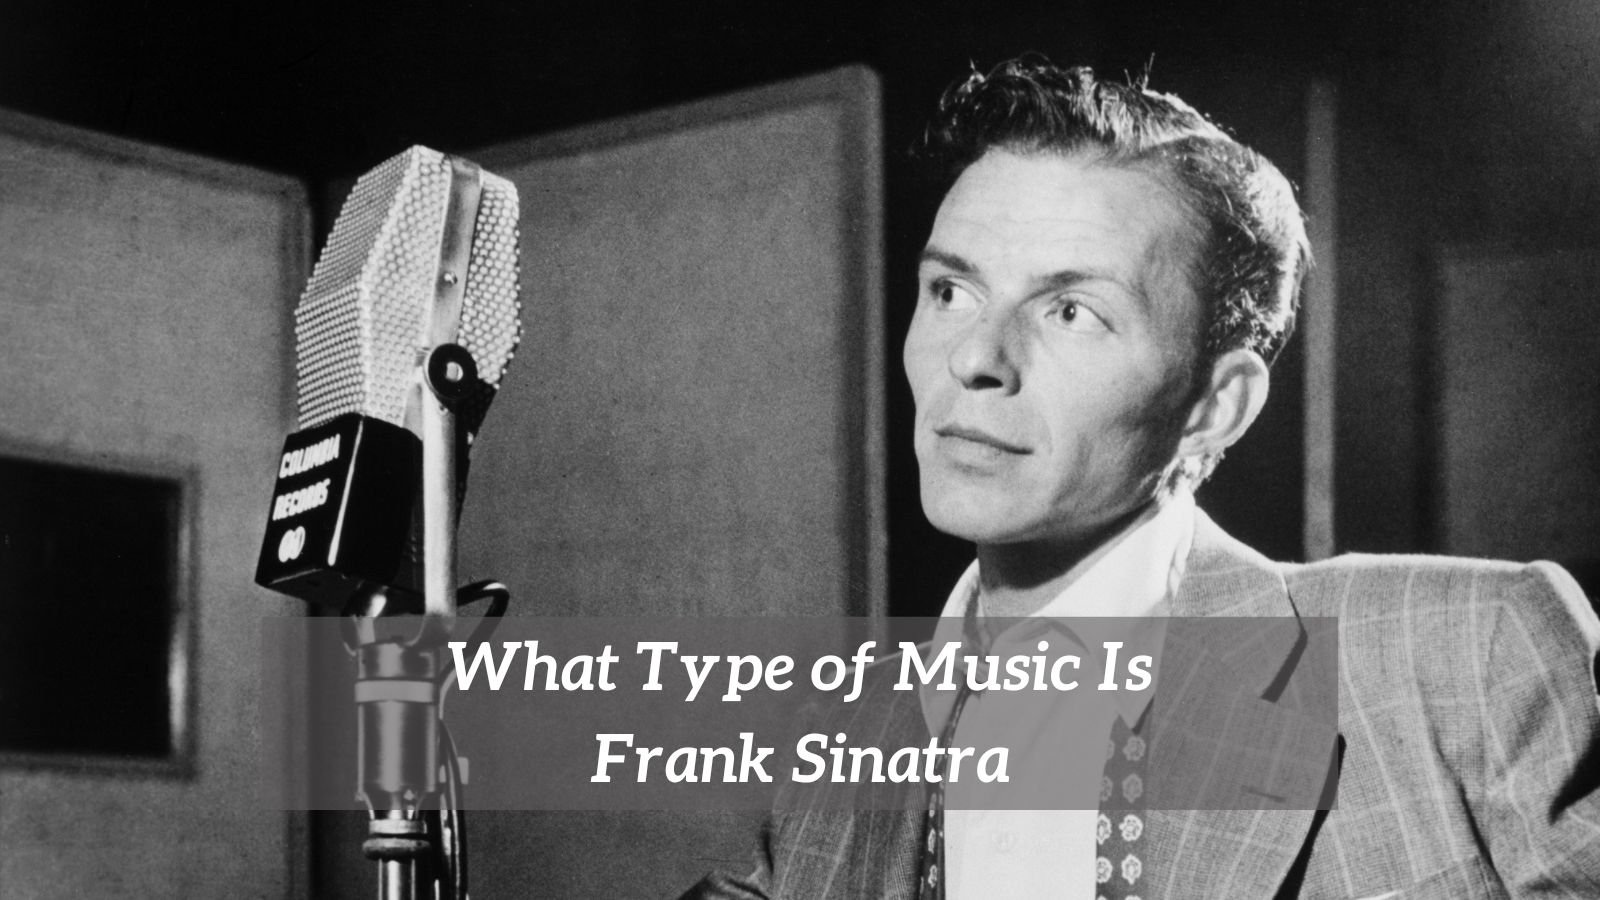 What Type of Music Is Frank Sinatra